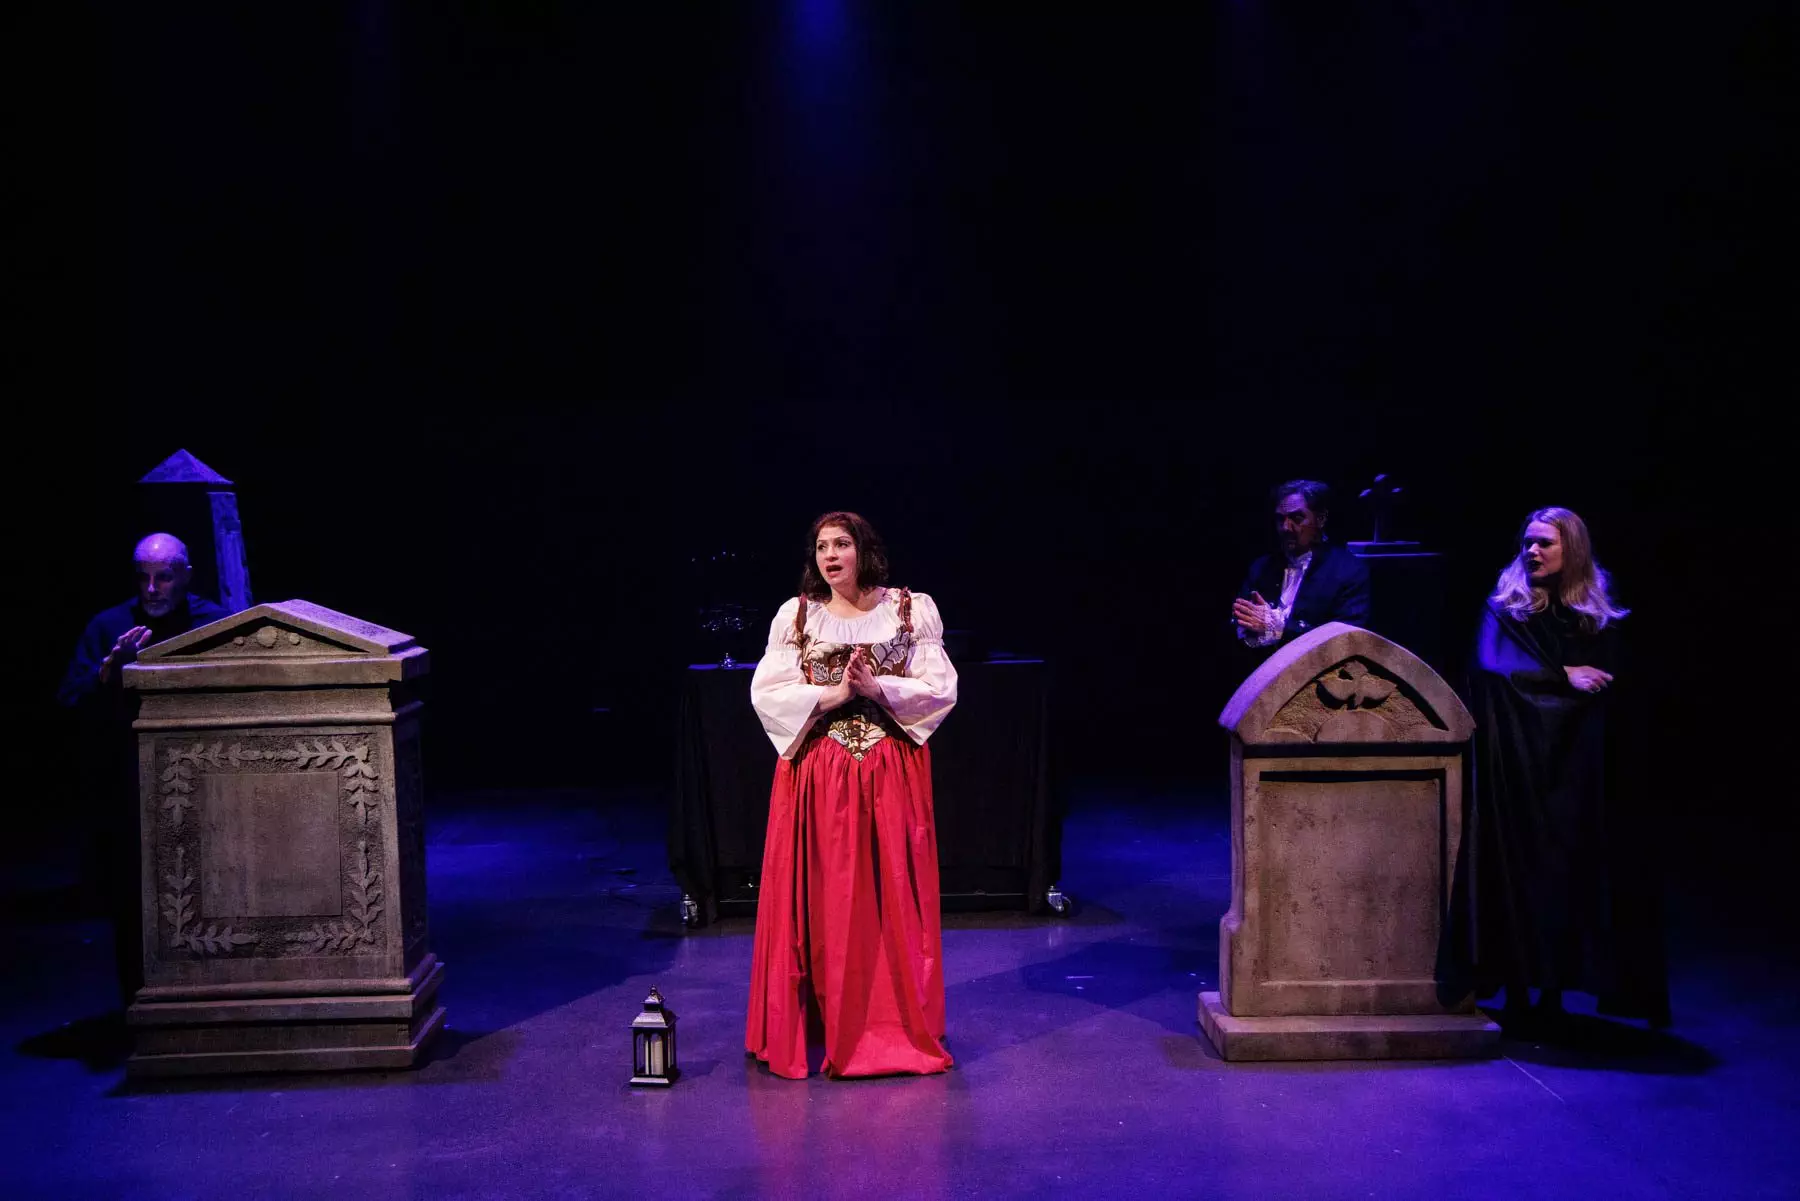 Emmy (Yana White) sings "Emmy’s Ballad of the Vampire" from Heinrich Marschner's "Der Vampyr". She wears a beautiful red peasant gown and a white blouse, looking anxious, with a lantern sitting beside her. Among the tombstones surrounding her, other cast members (Doug Brunker, Kyle Hancock, and Holly Howard) lurk in dark clothing.